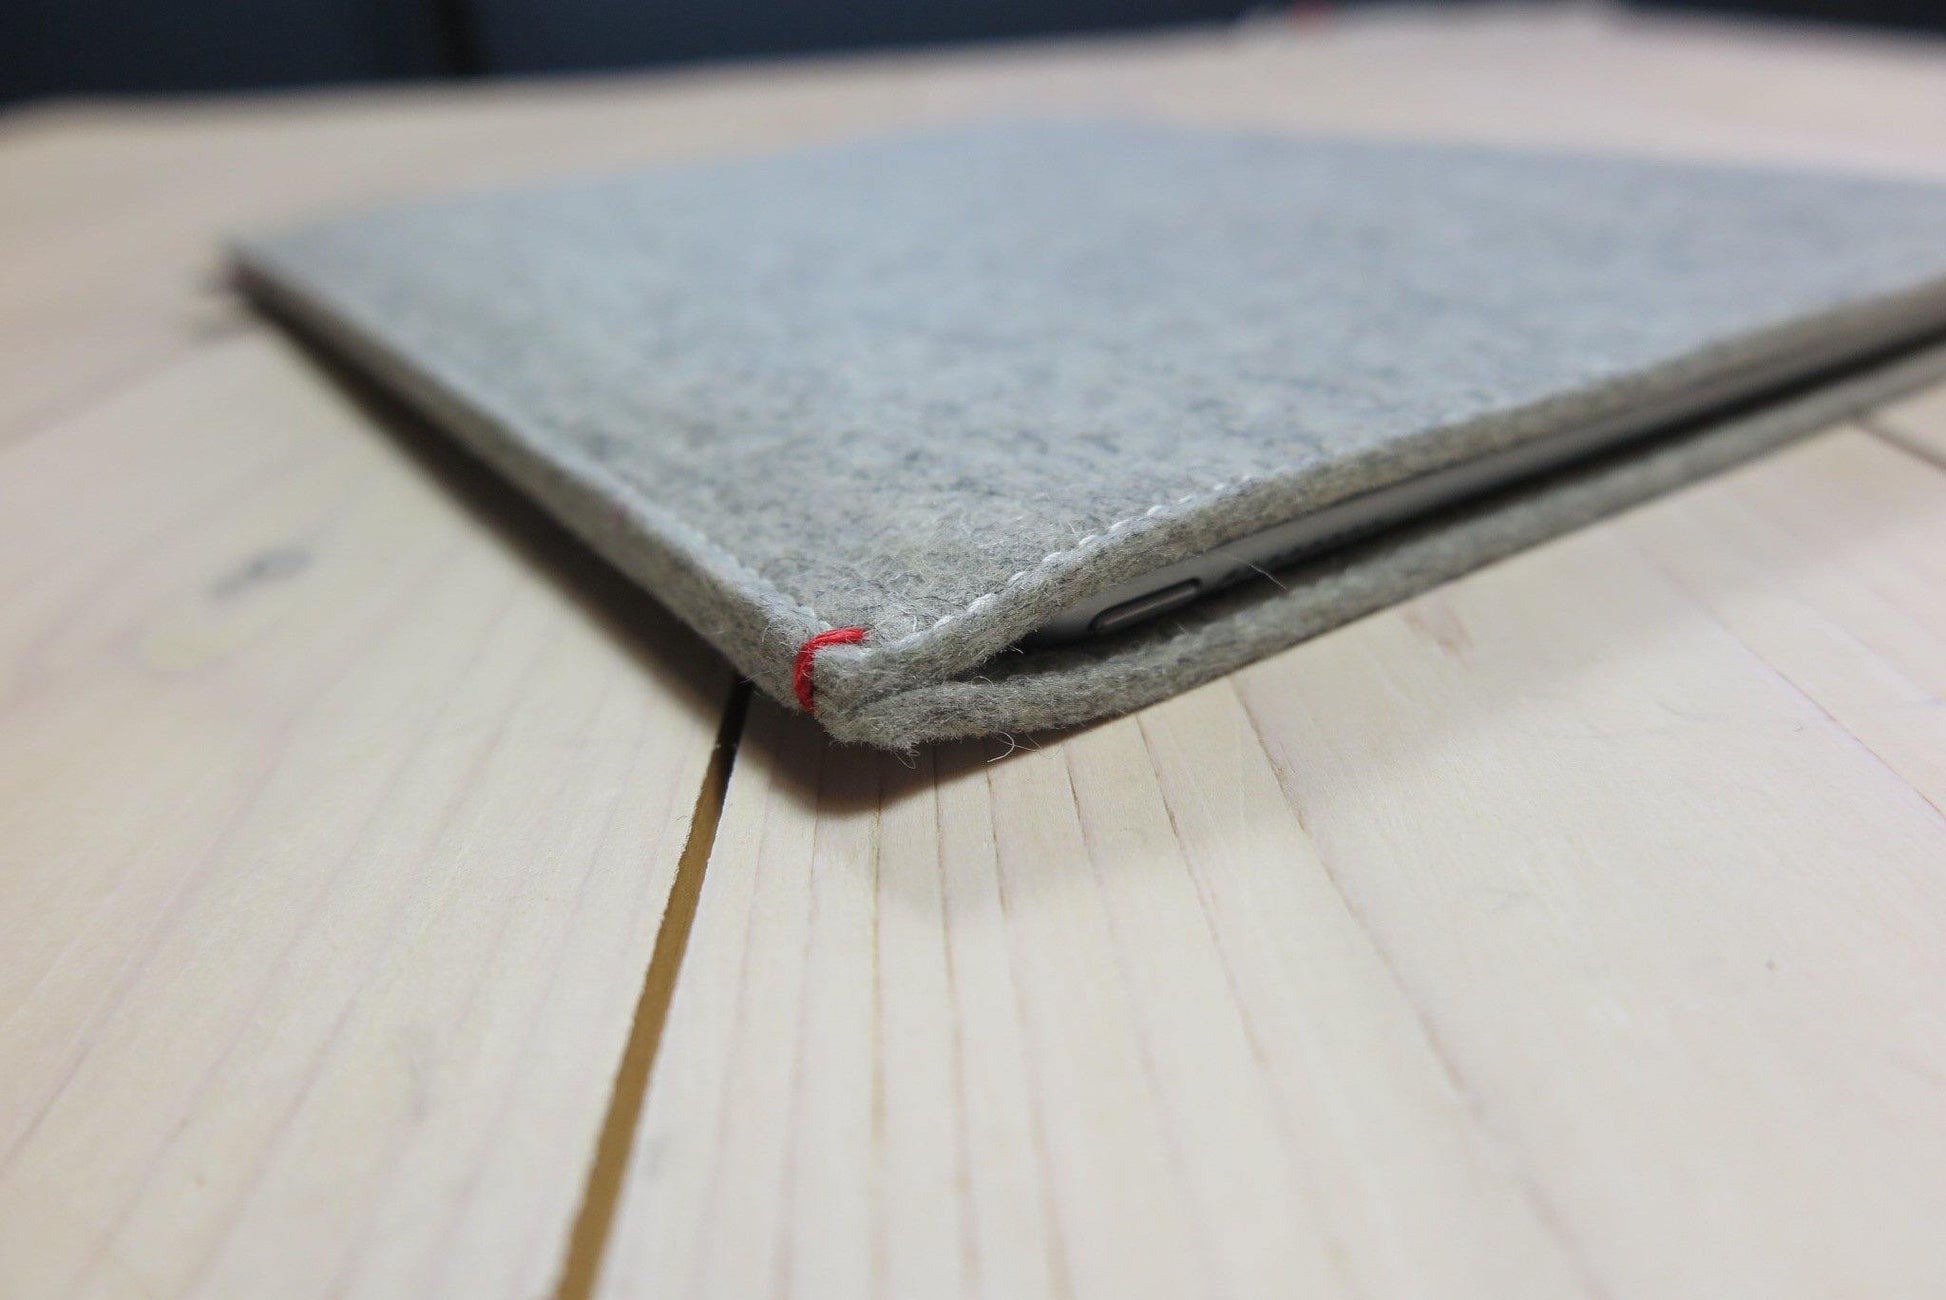 Grey wool felt iPad Pro case with a red detail